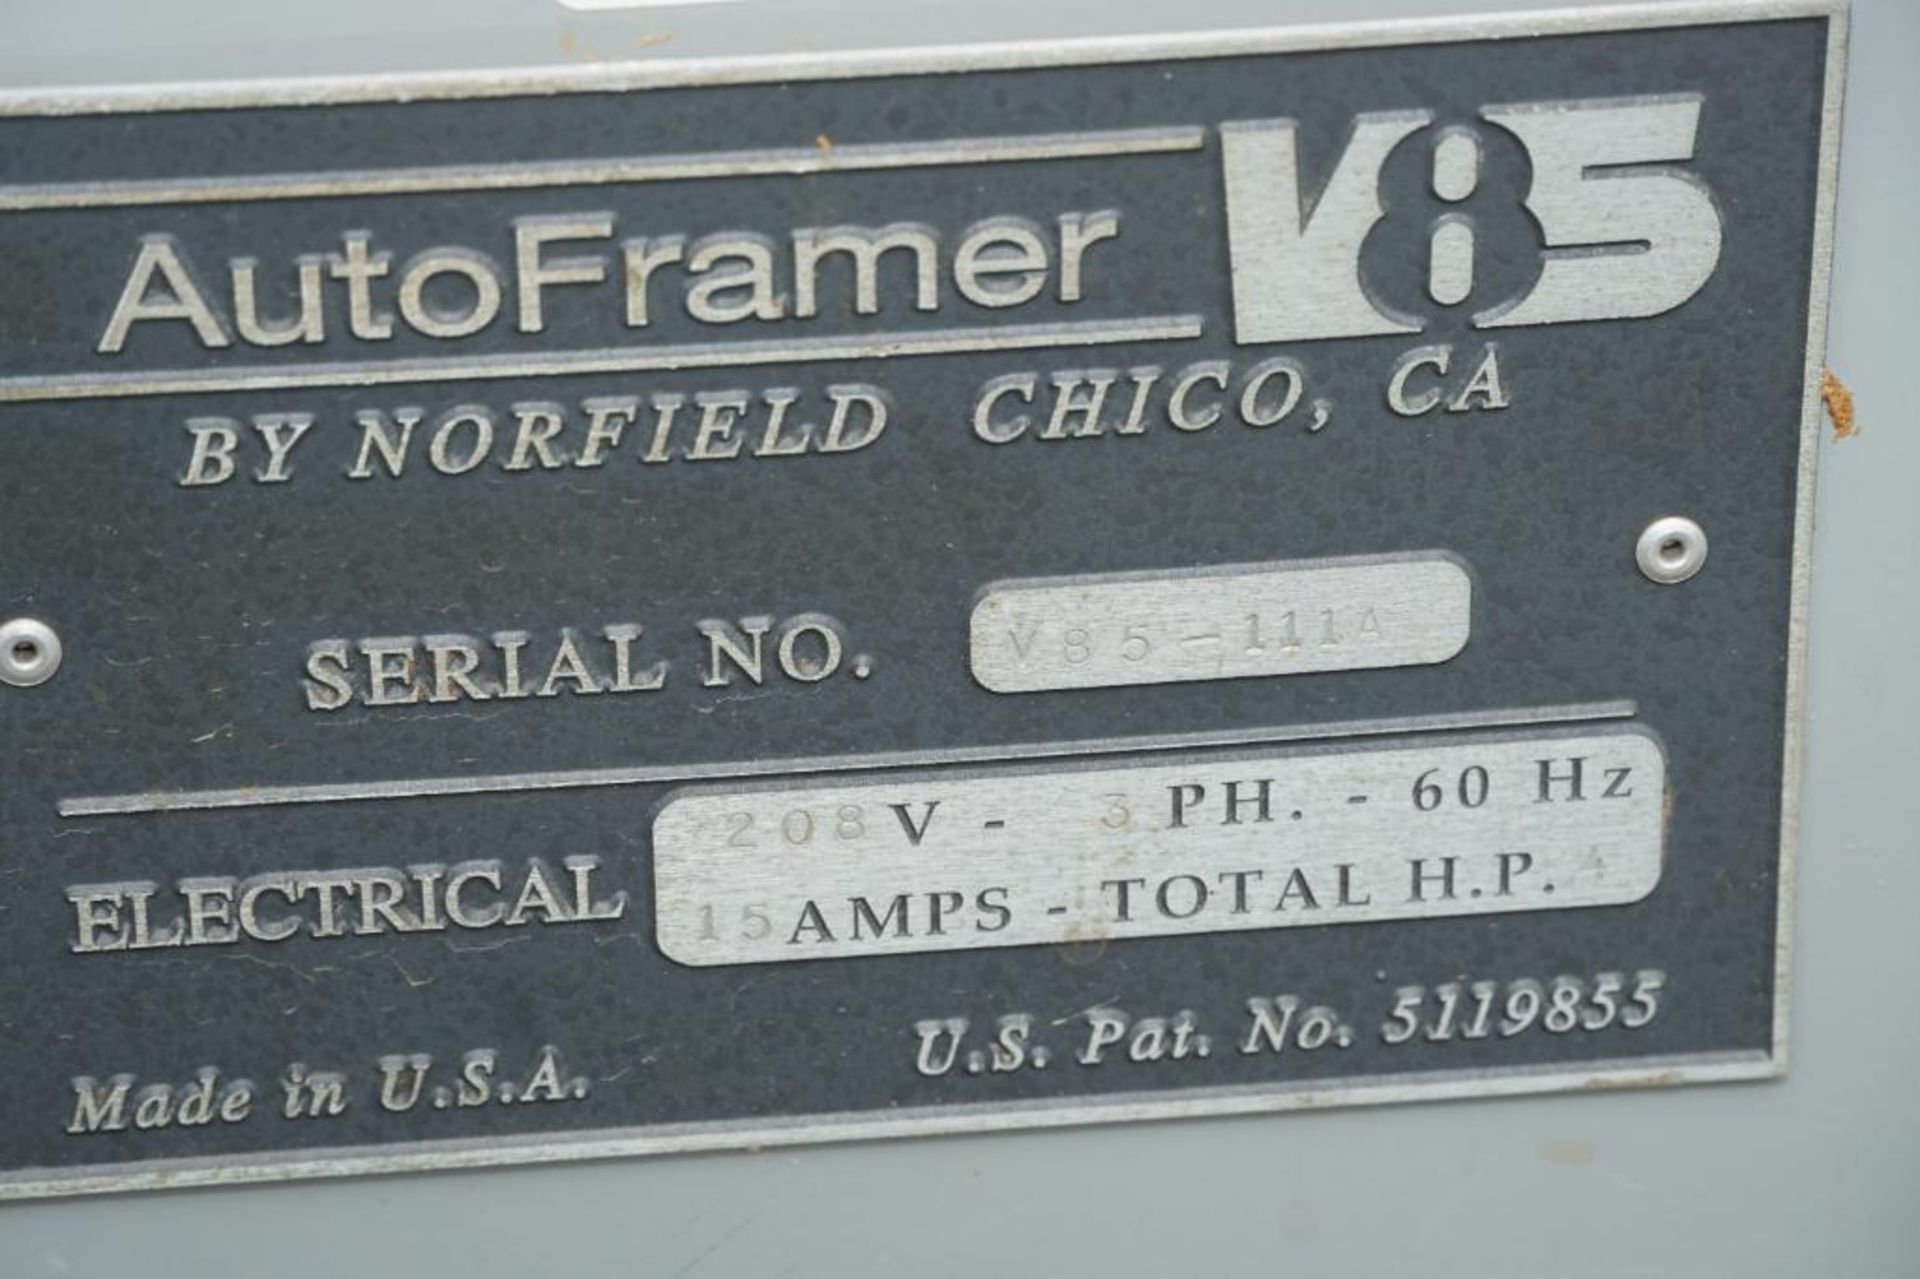 Norfield Auto Framer - Image 8 of 8